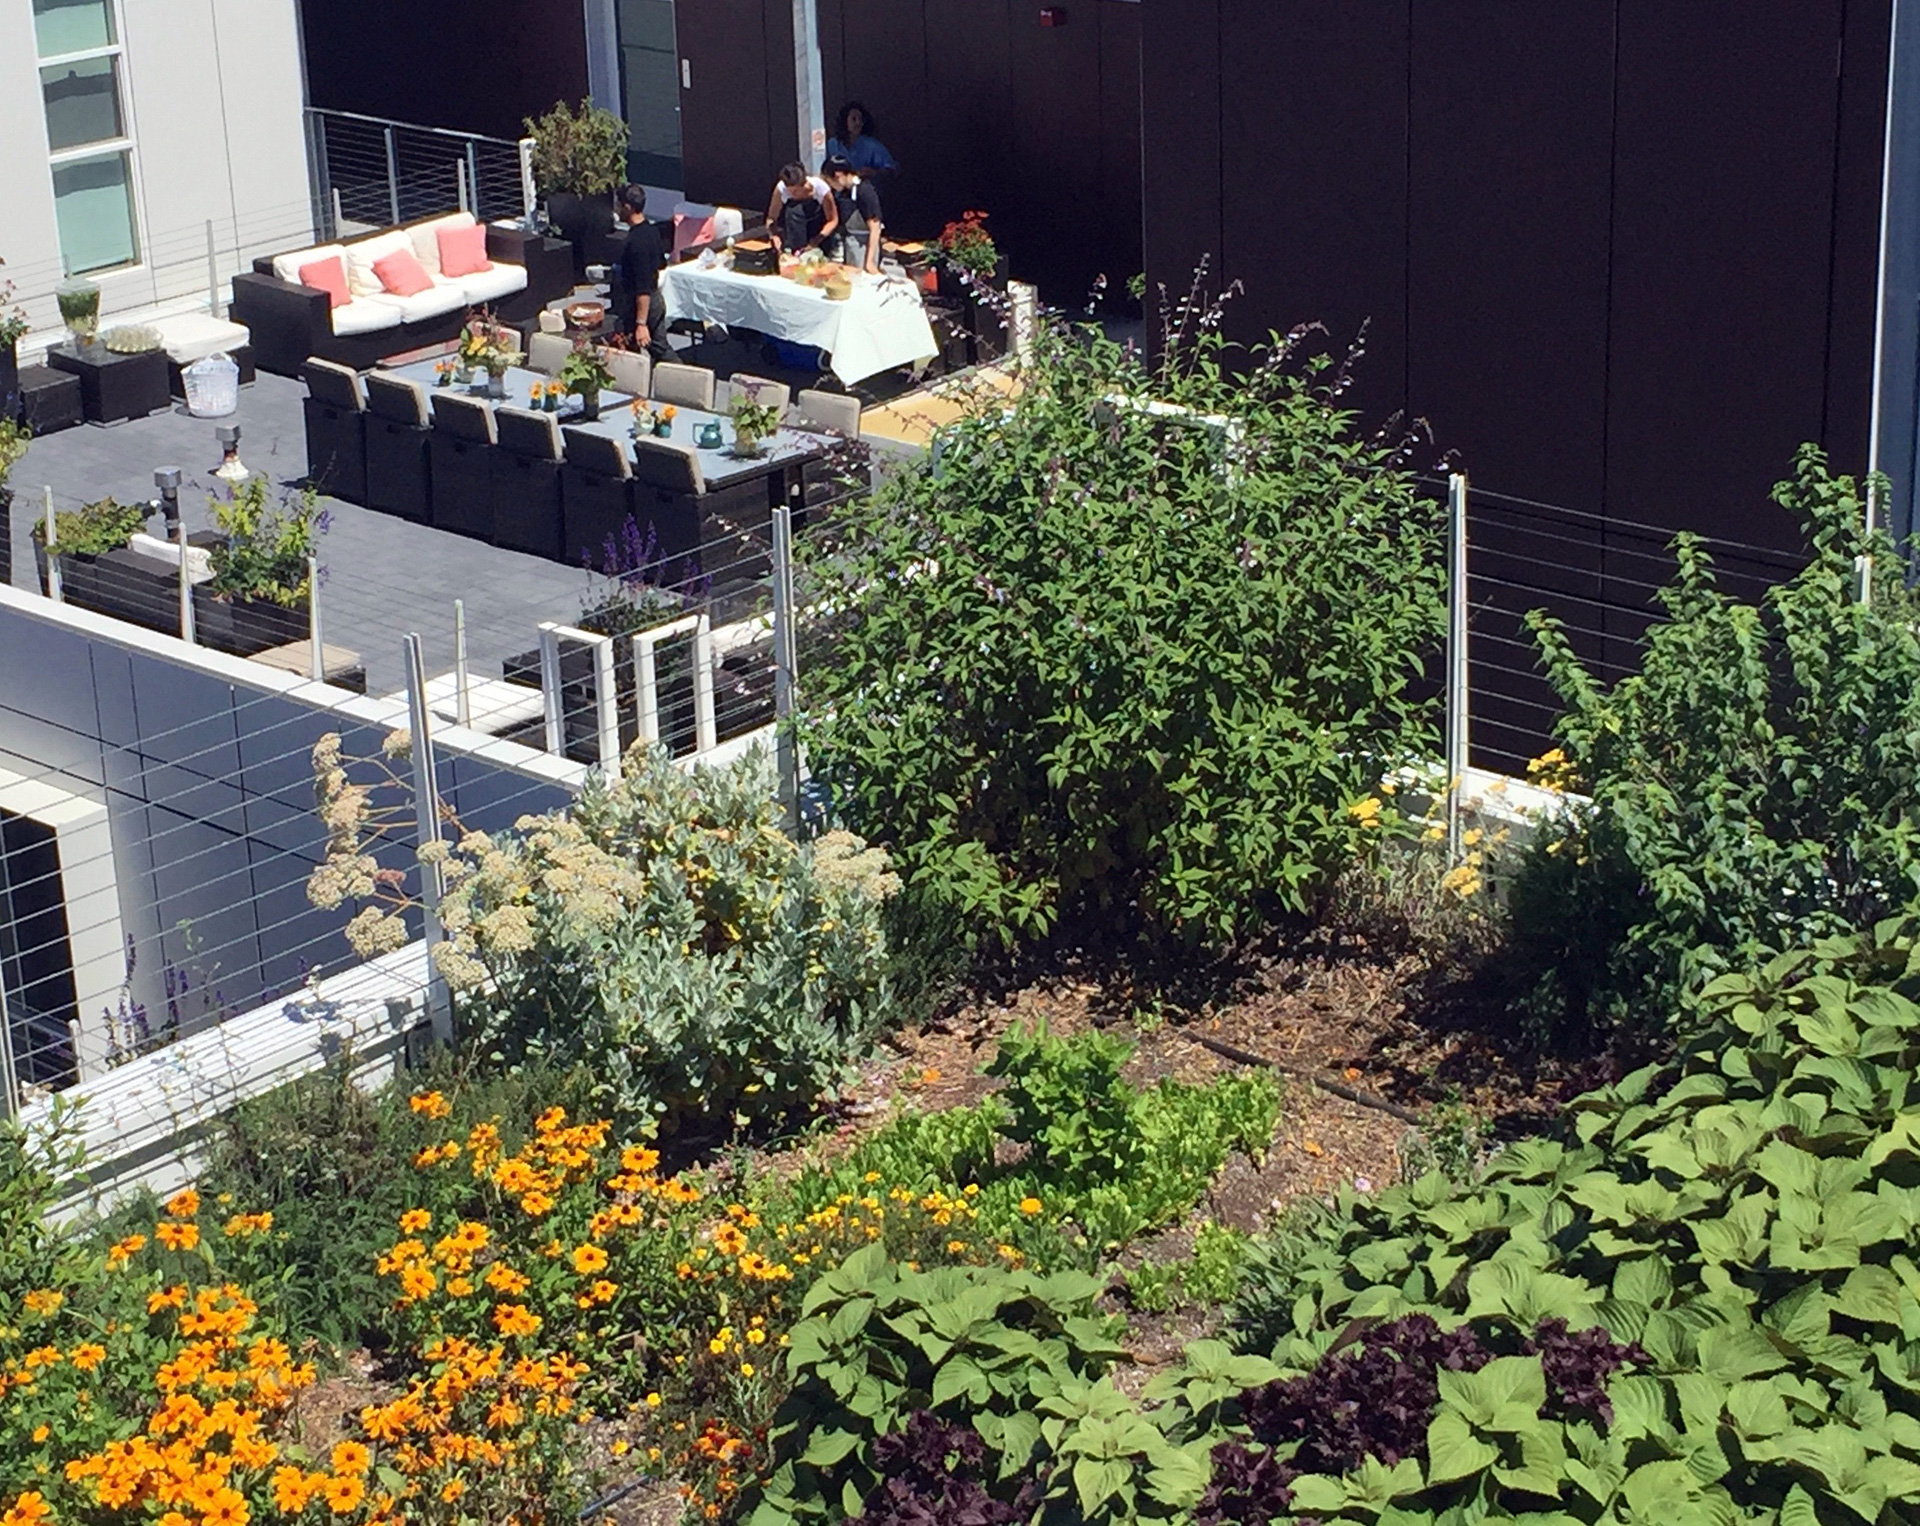 Rasmussen and assistants set up for pop-up lunch on a rooftop in Berkeley, amid the organic garden plots of Top Leaf Farms.